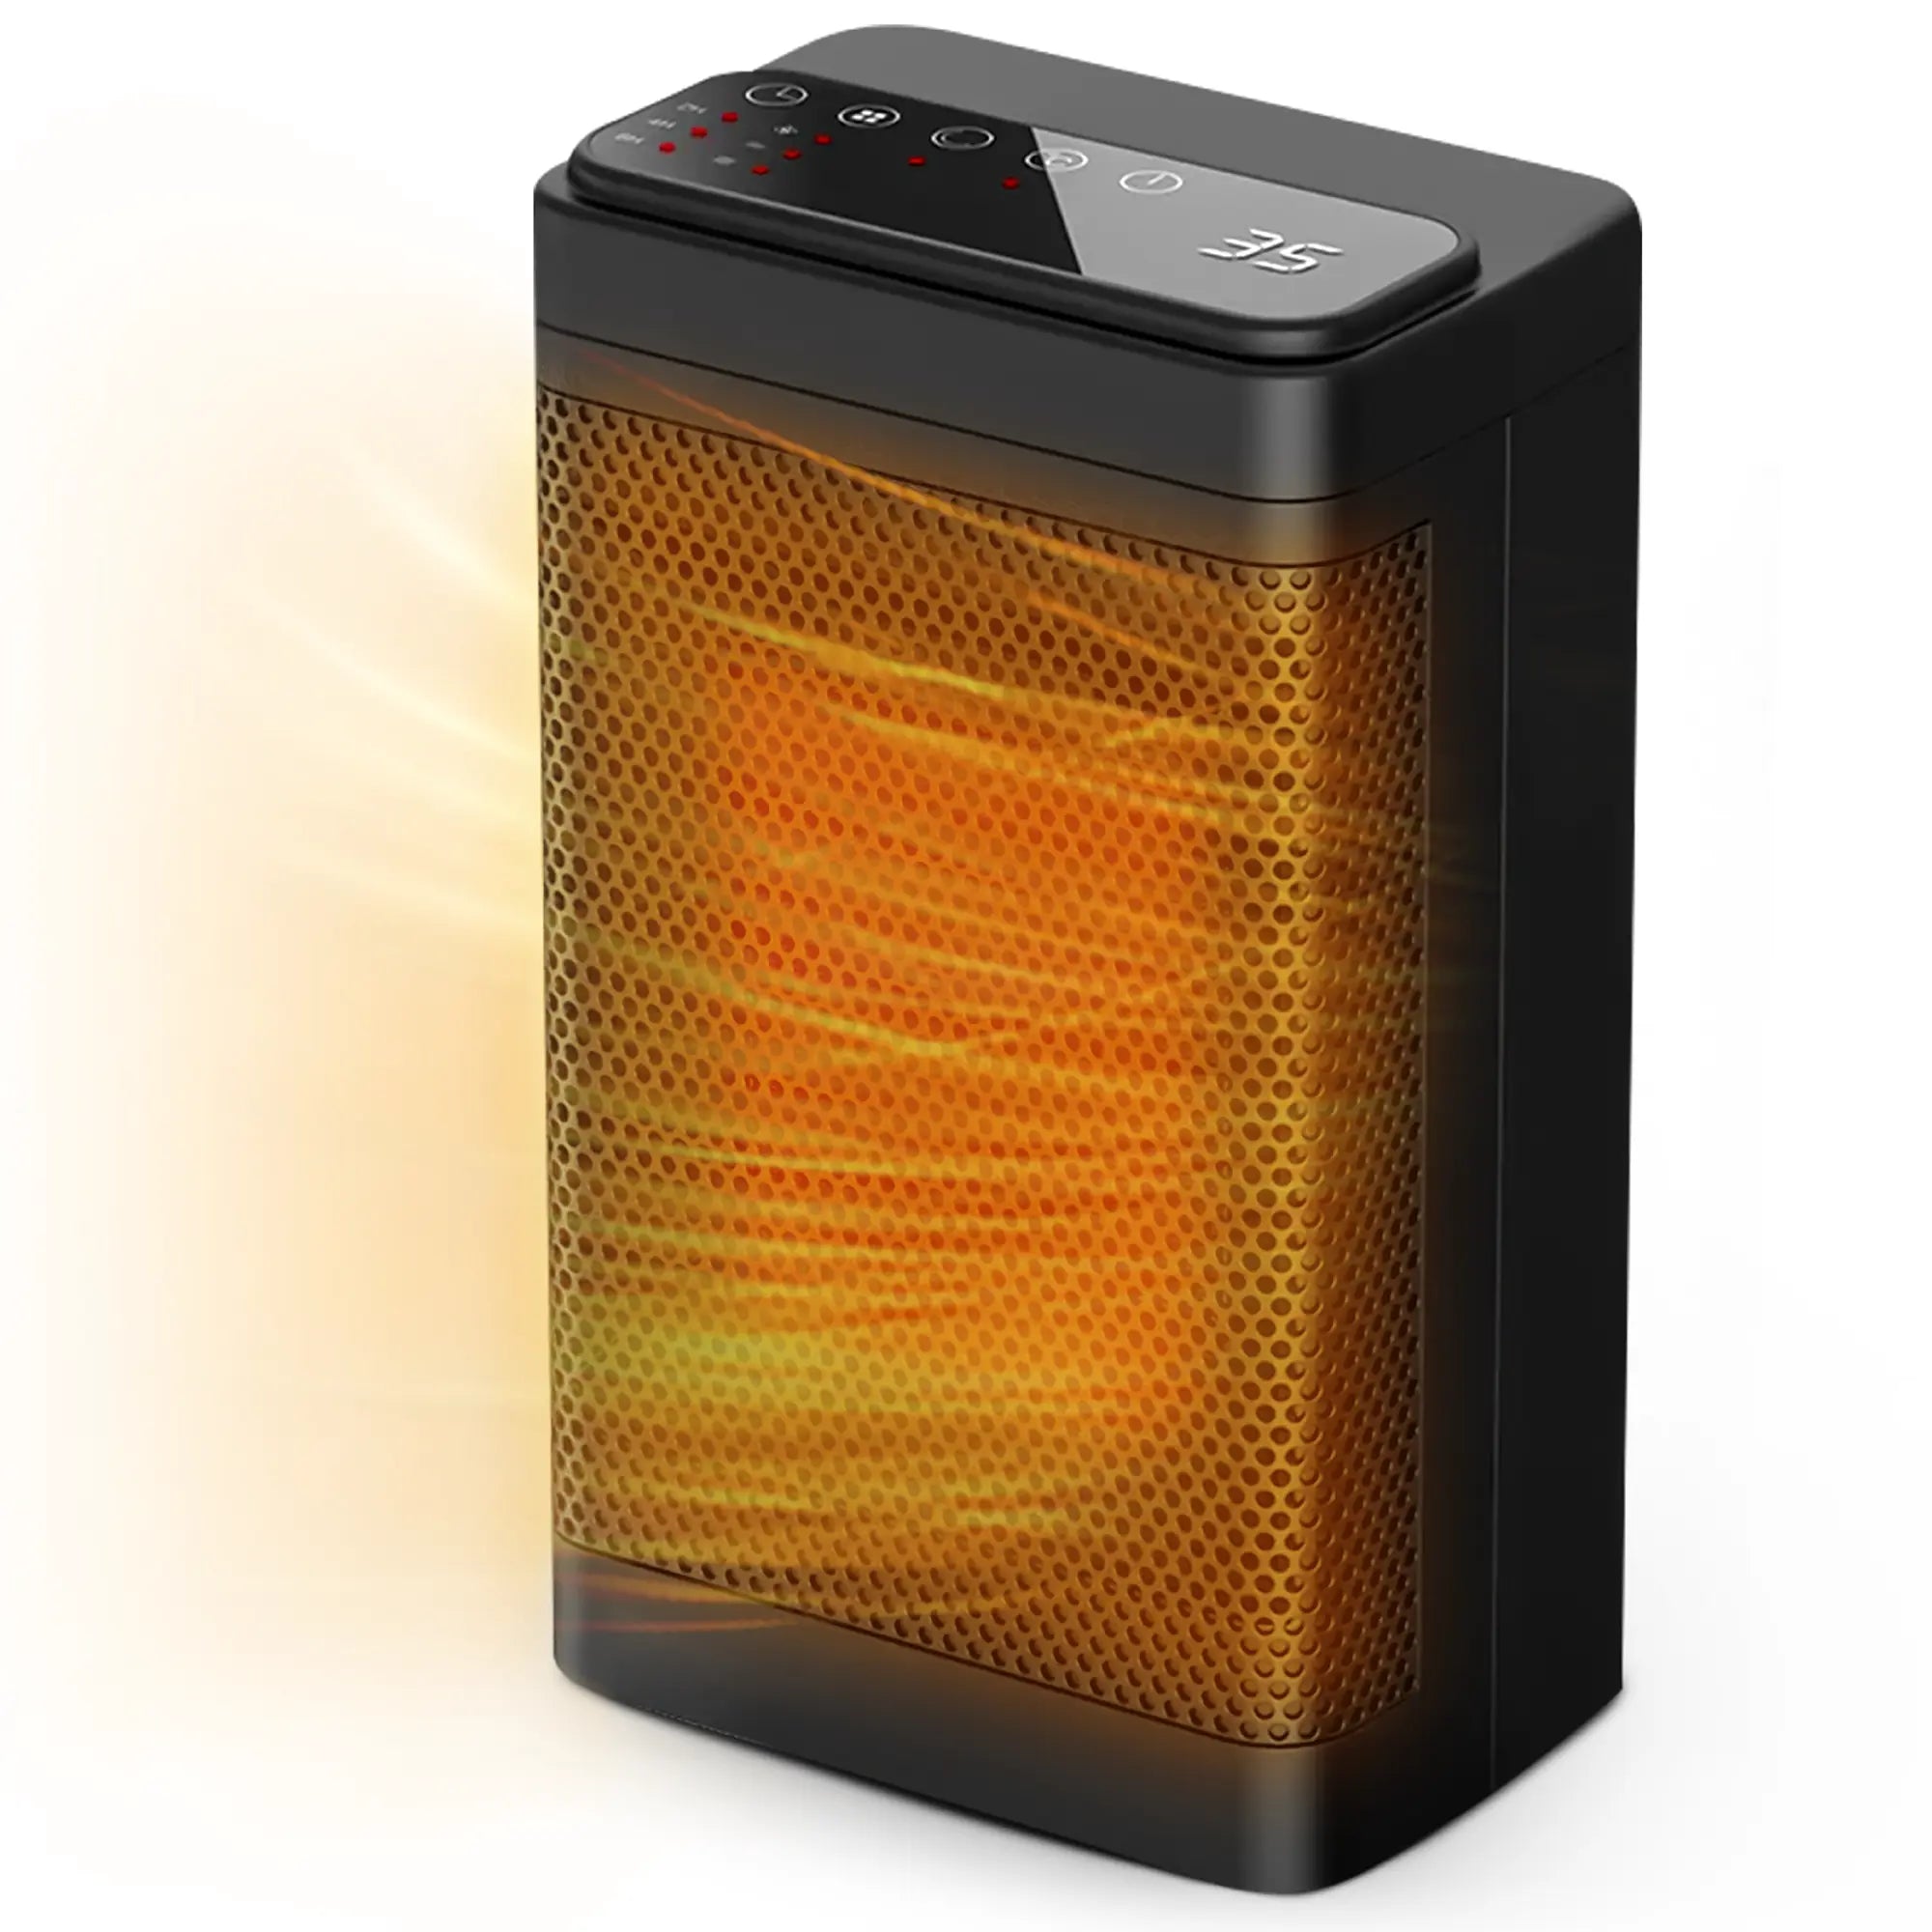 SunnyBreezy1500WHeater|PortableElectricHeaterwithThermostat-F